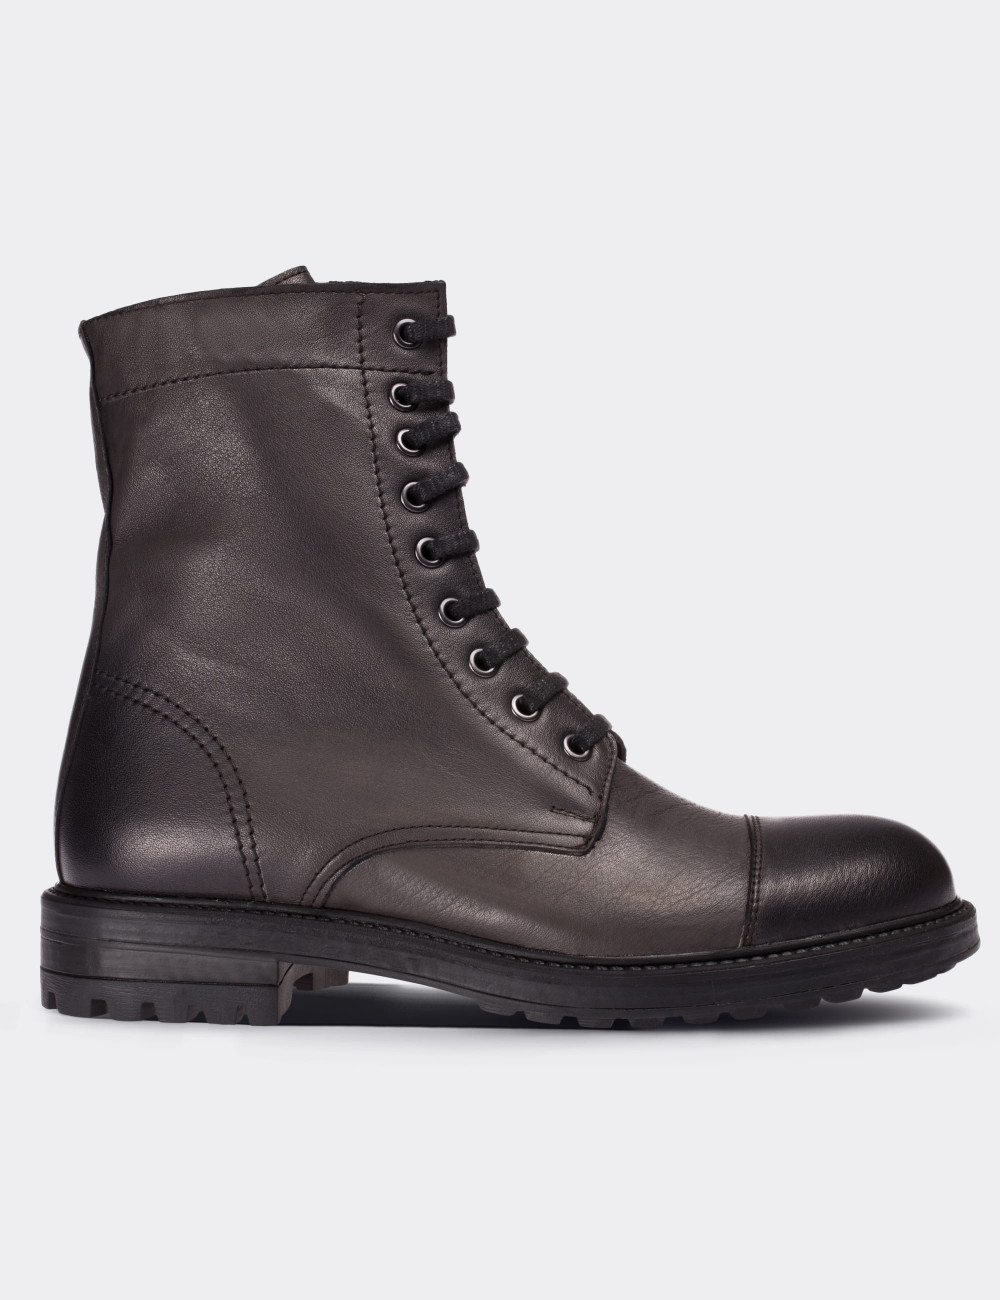 Gray  Leather Postal Boots - 01857MGRIC01